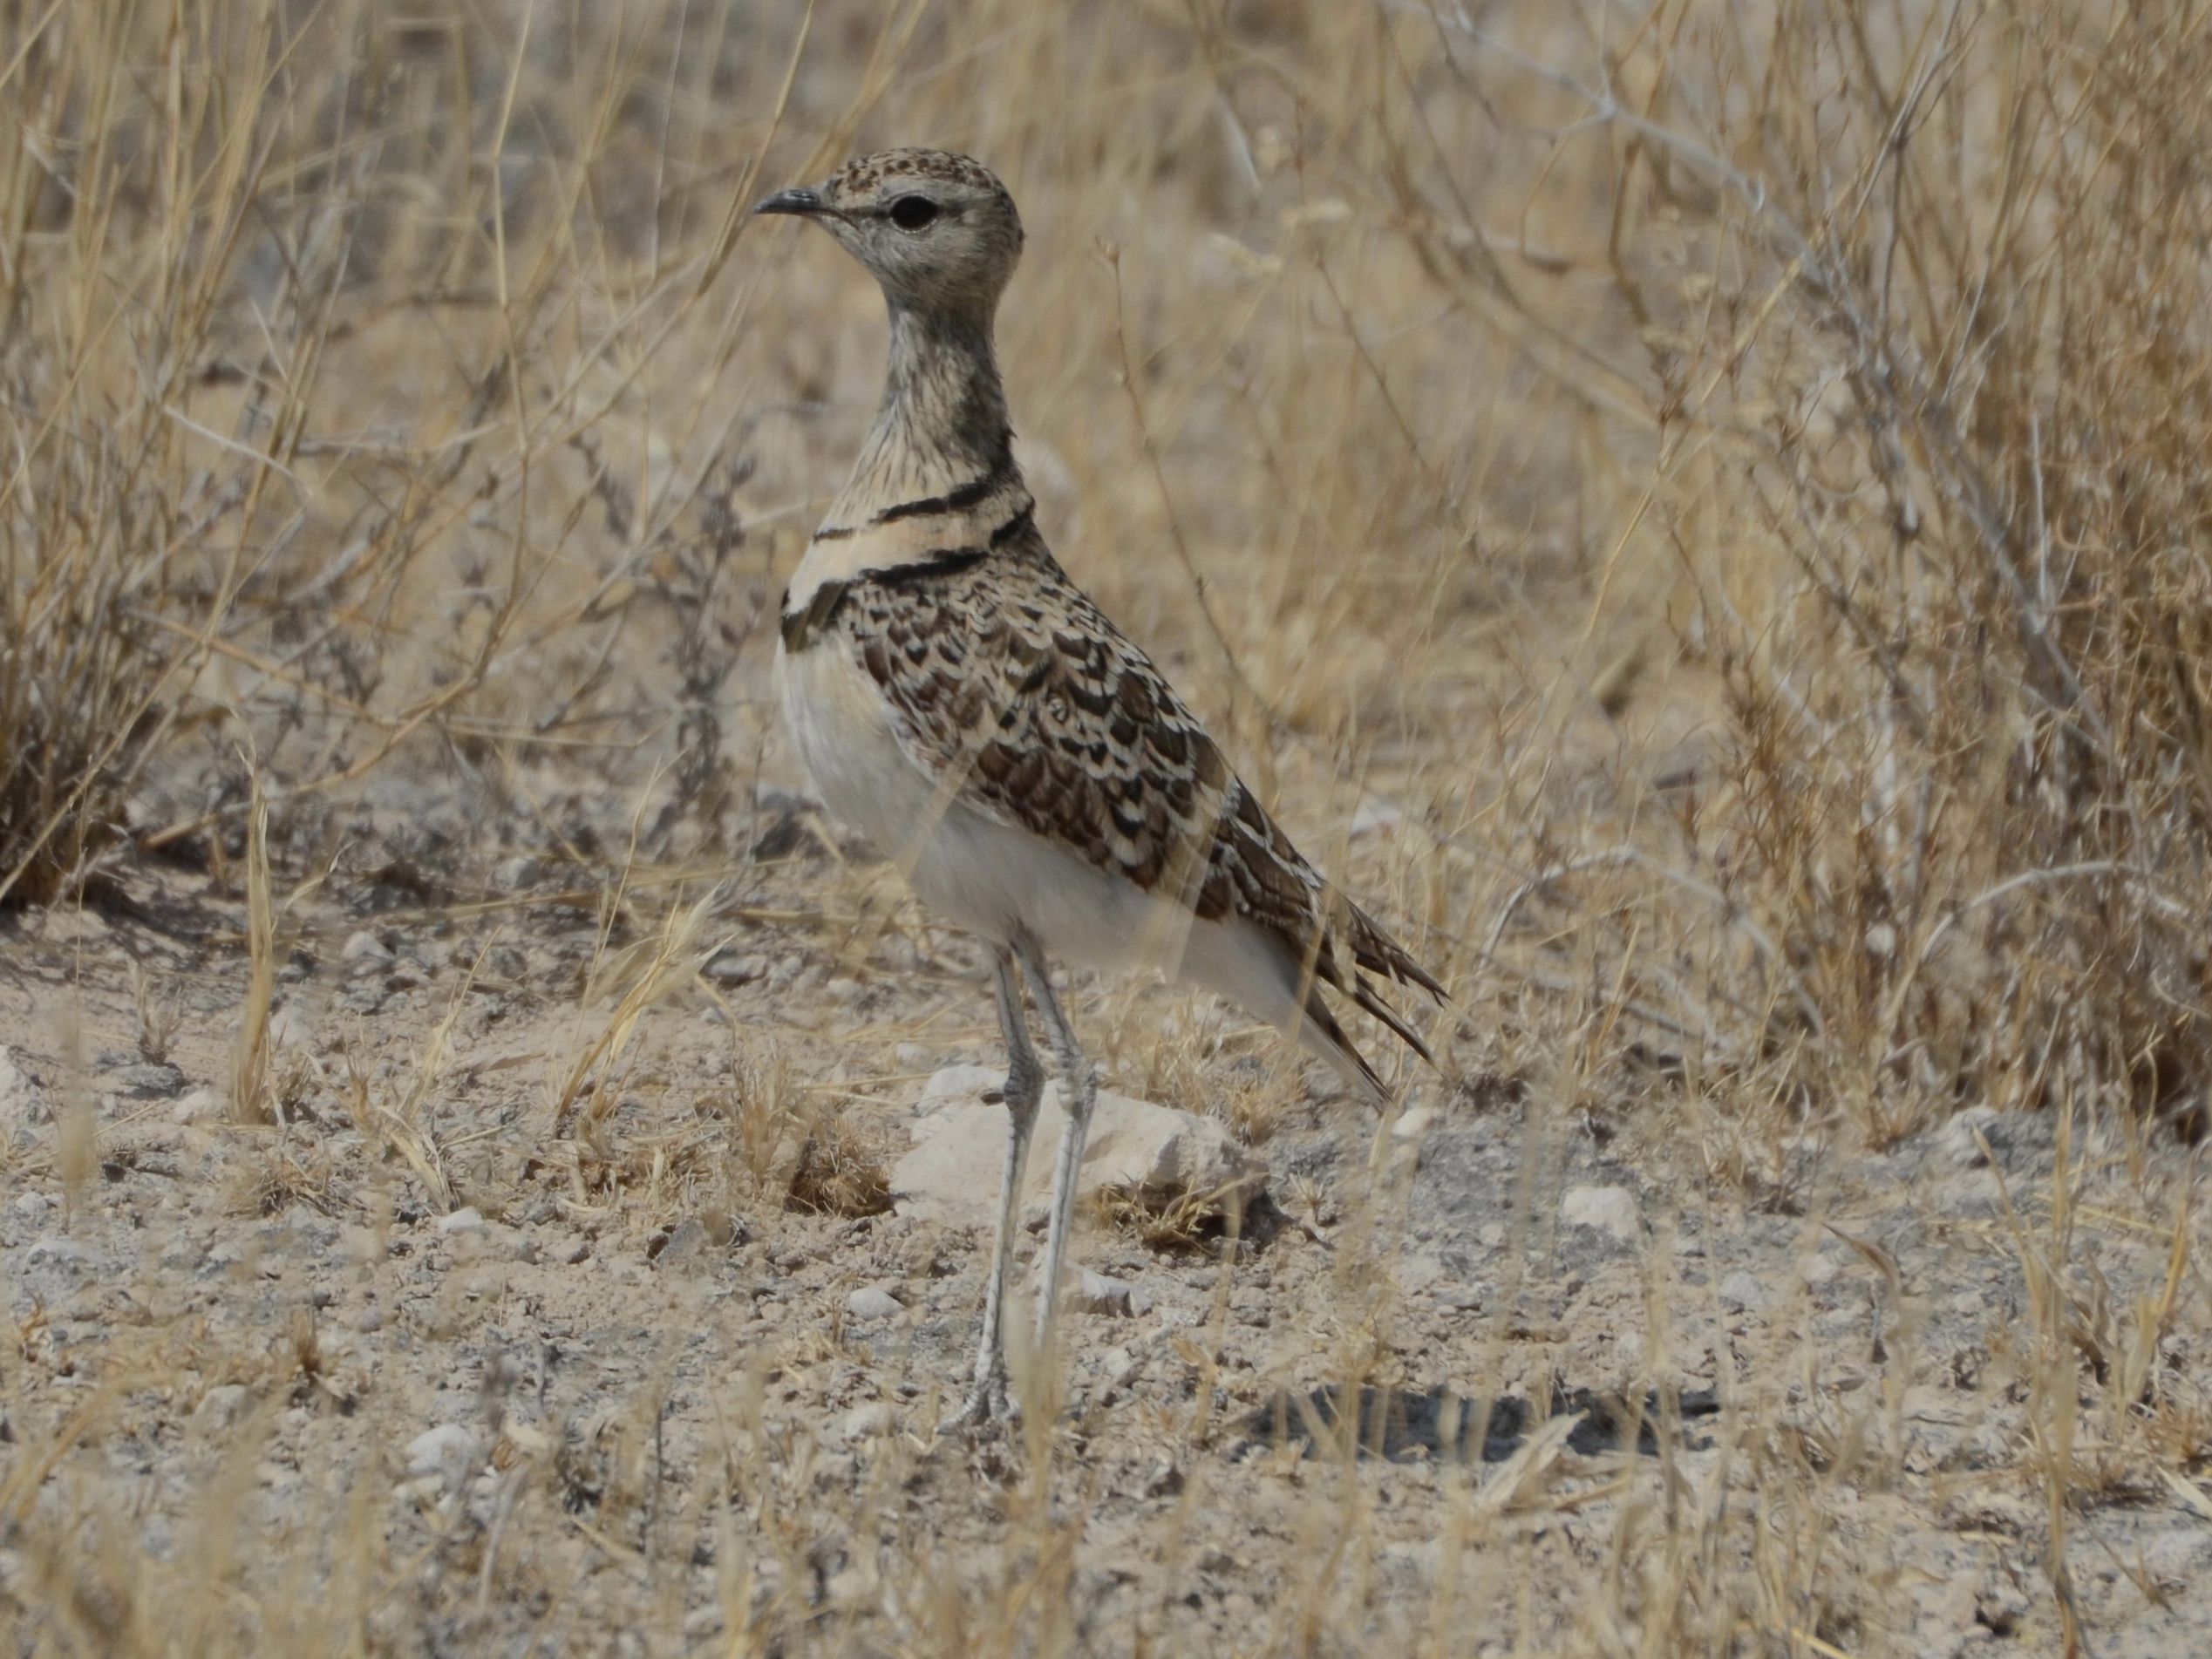 Click picture to see more Double-banded Coursers.